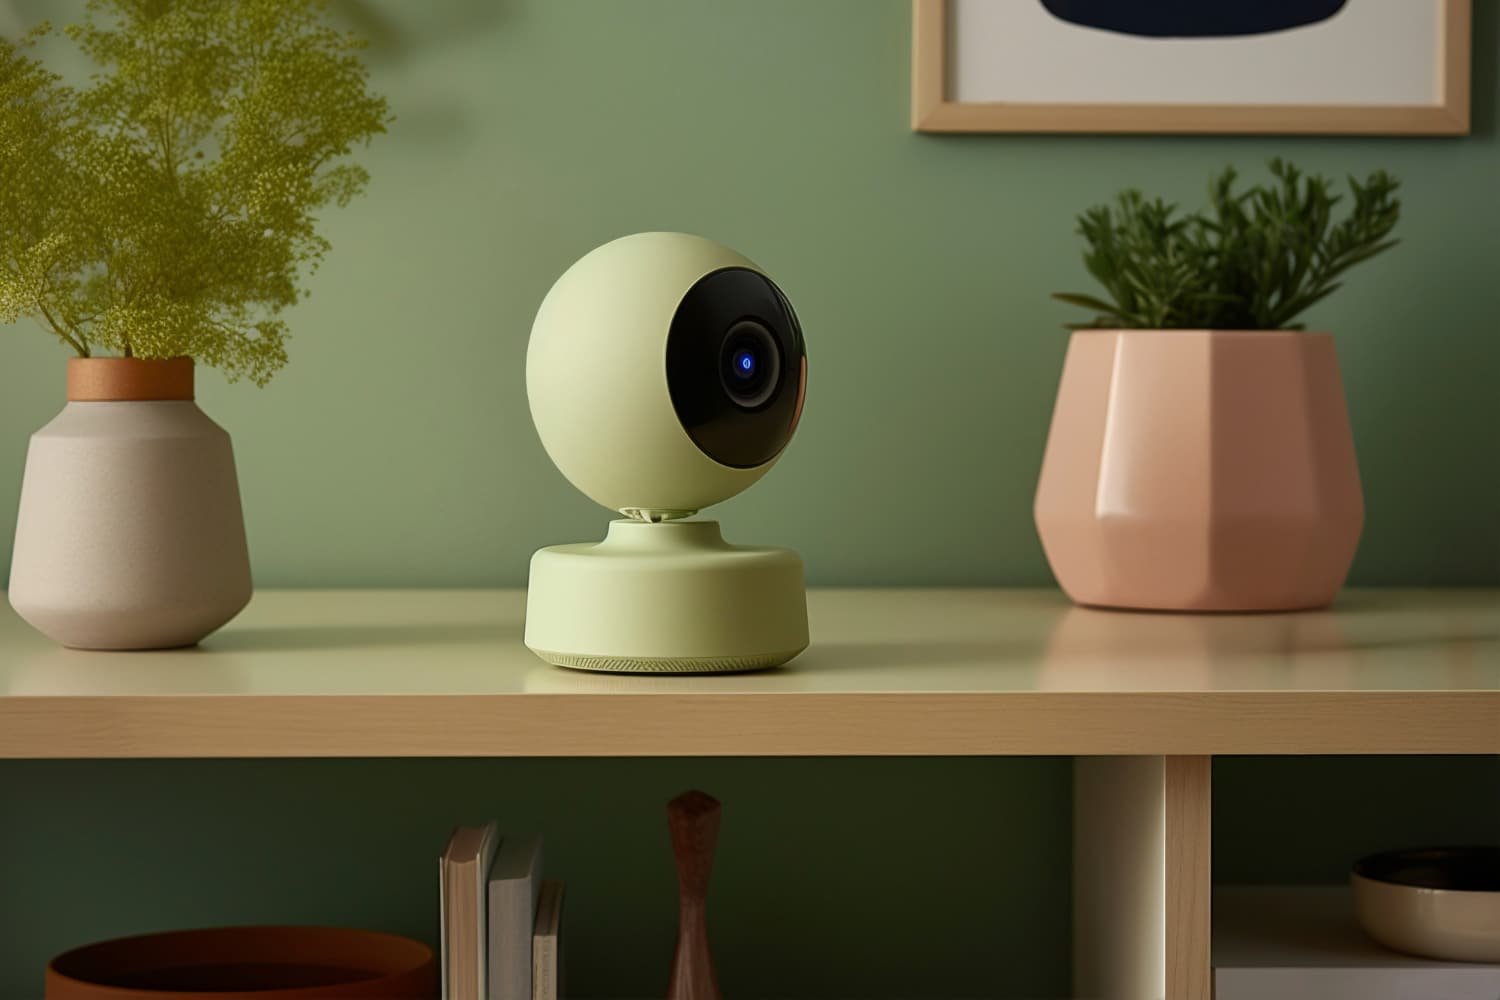 Secure Your Home Intelligently With Arlo’s Smart Home Security Cameras